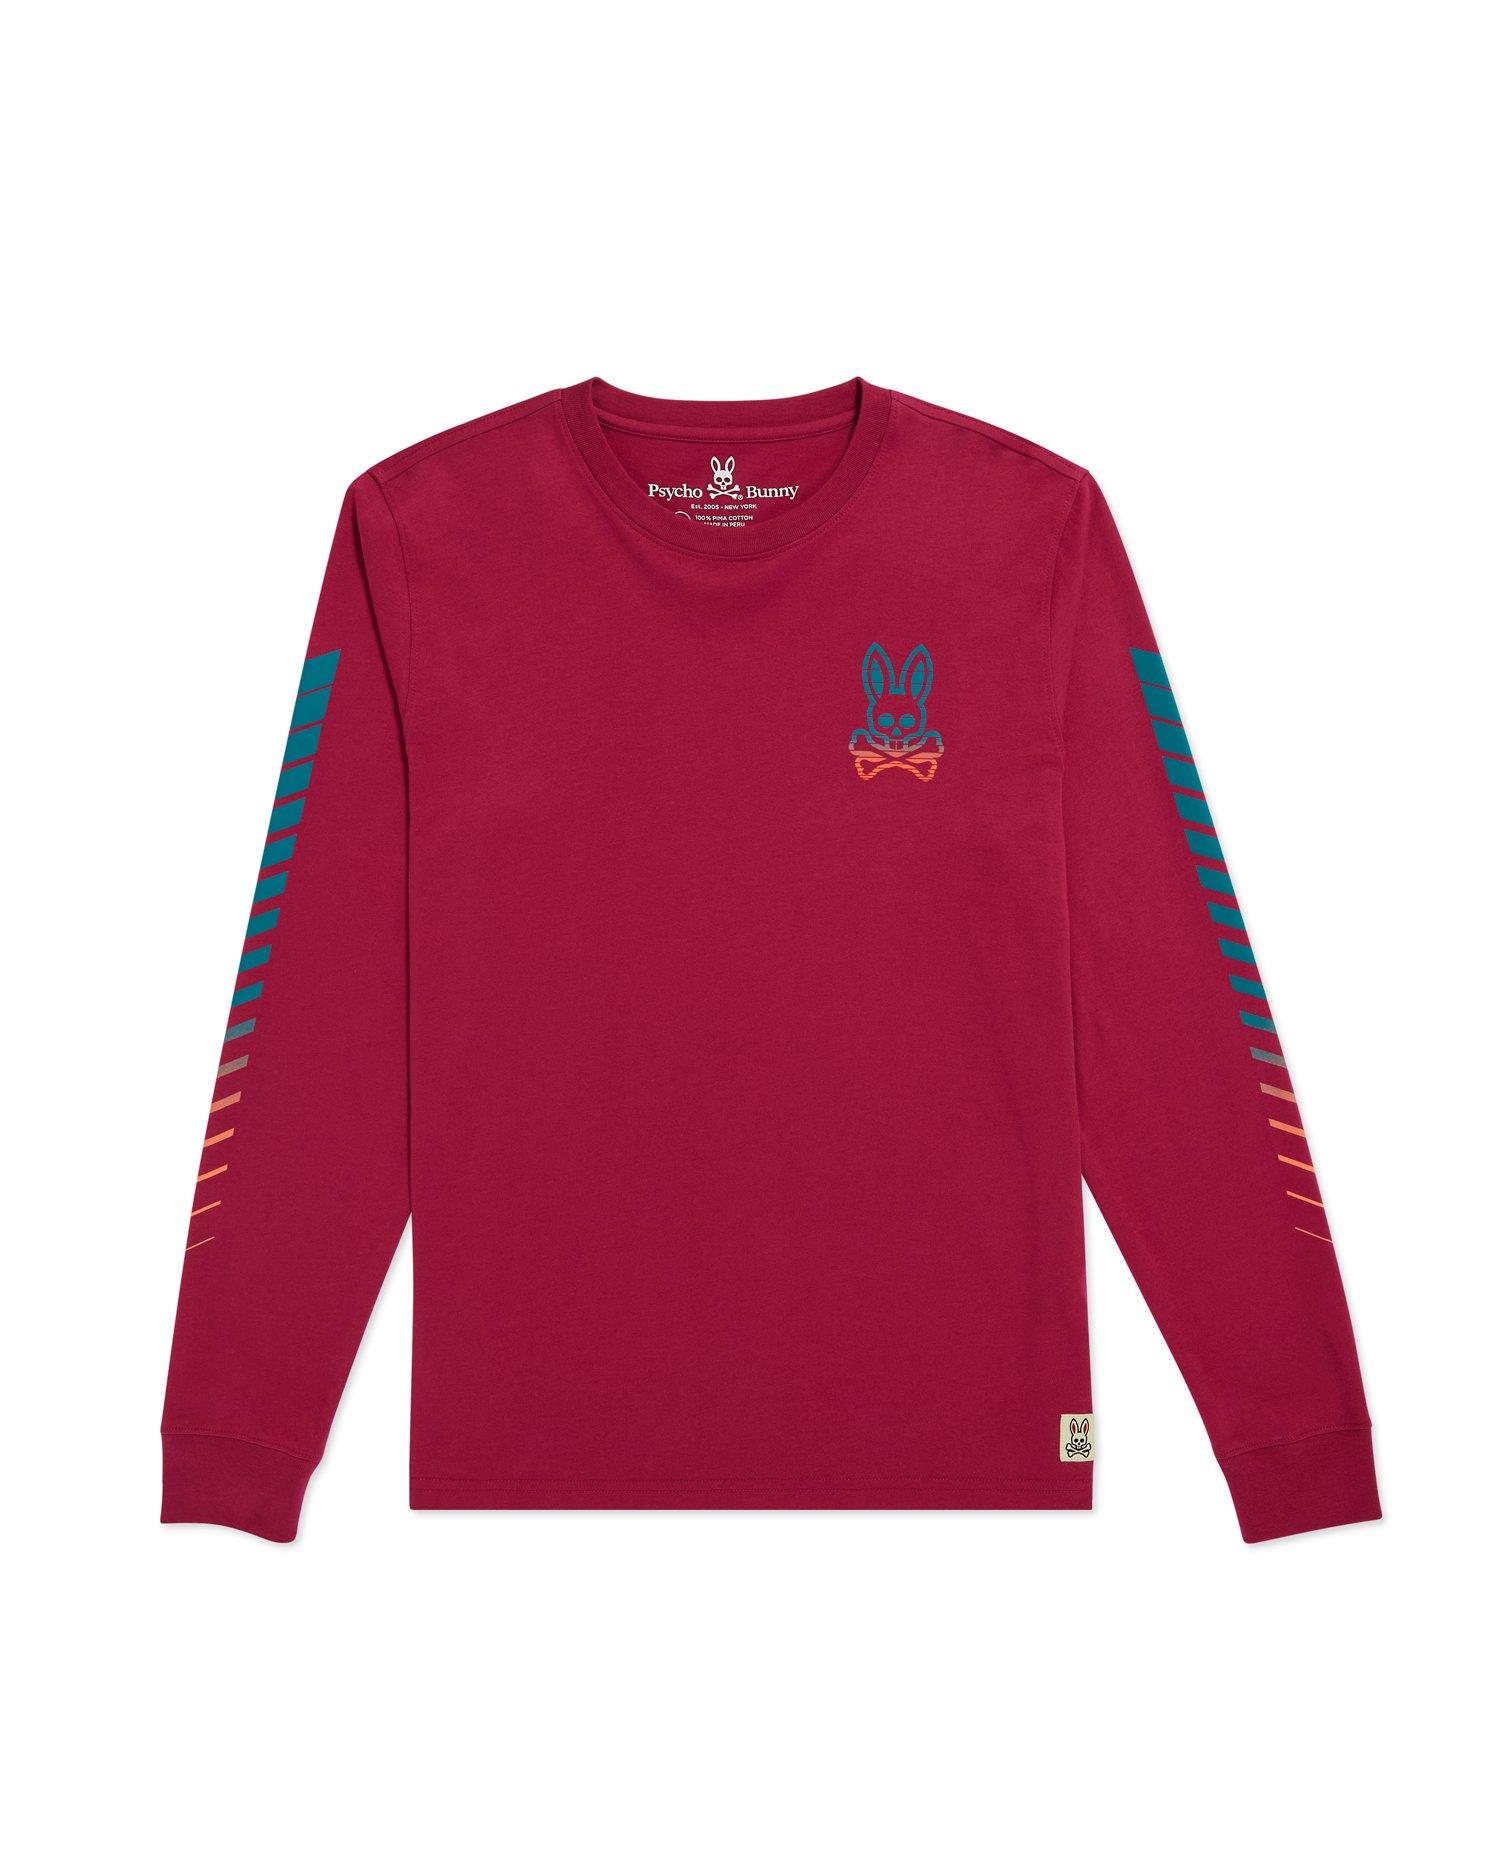  Egremont Long Sleeve Graphic Tee  image 0